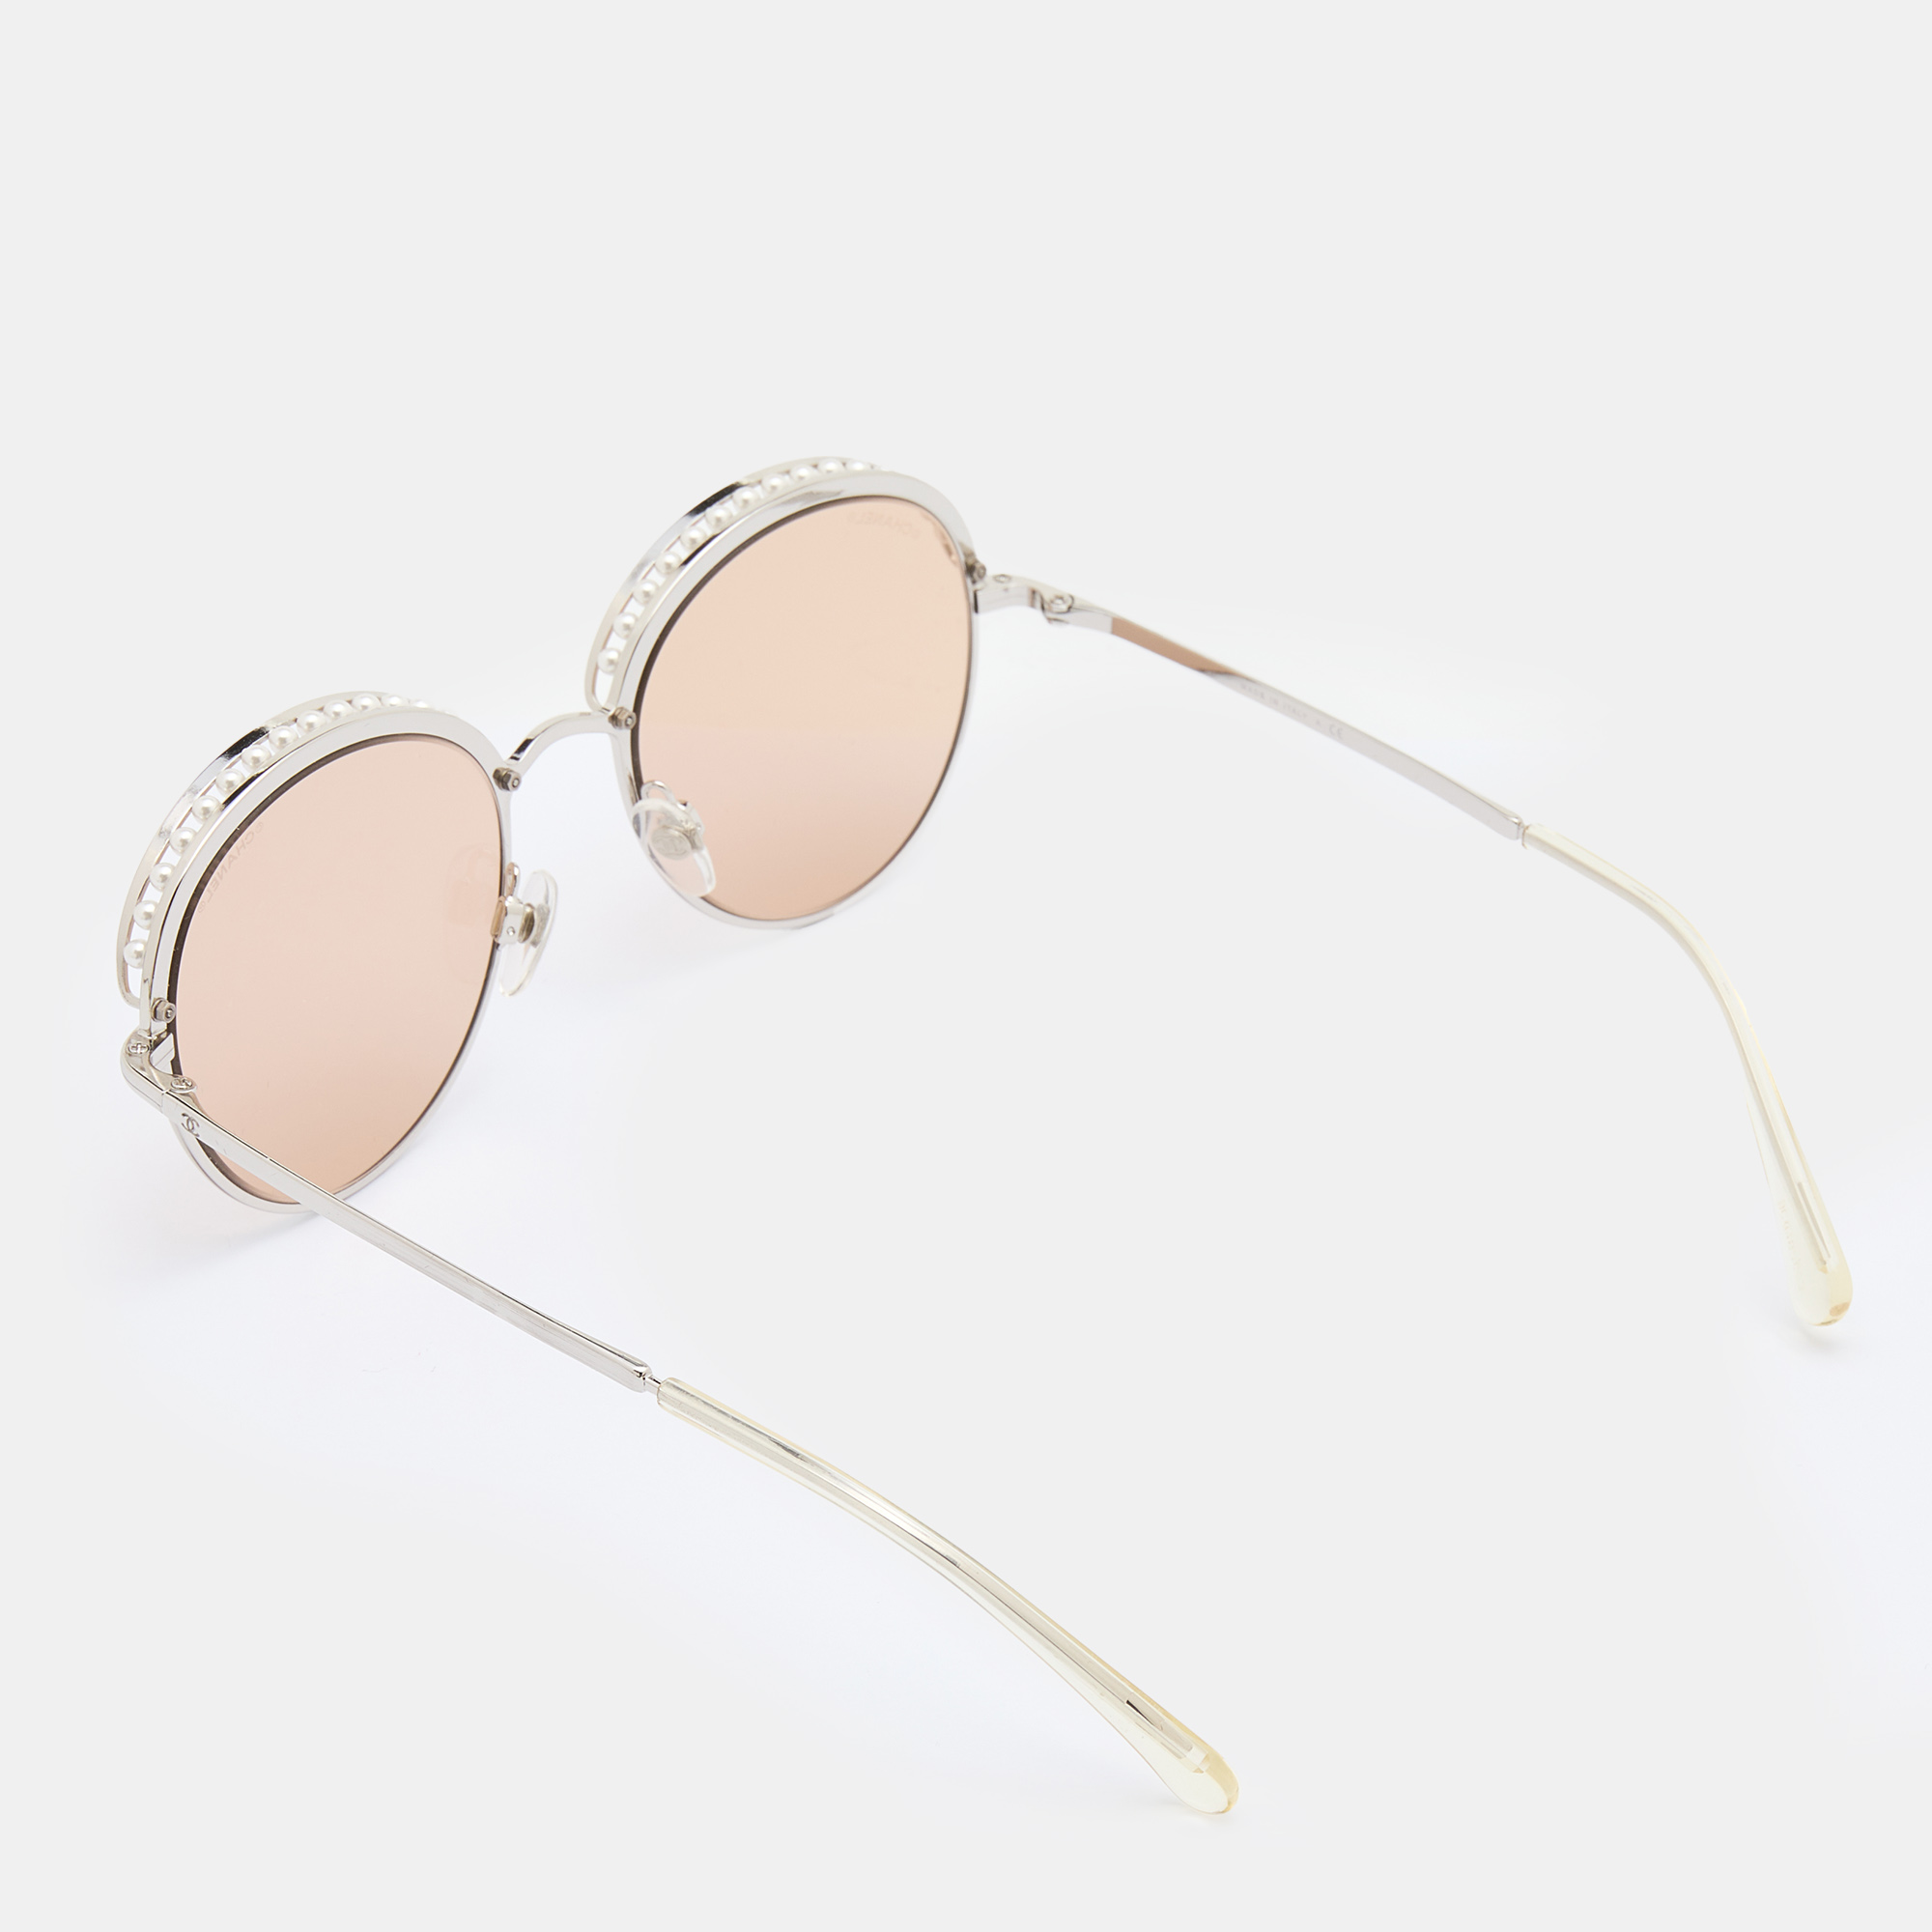 chanel sunglasses with pearls on side